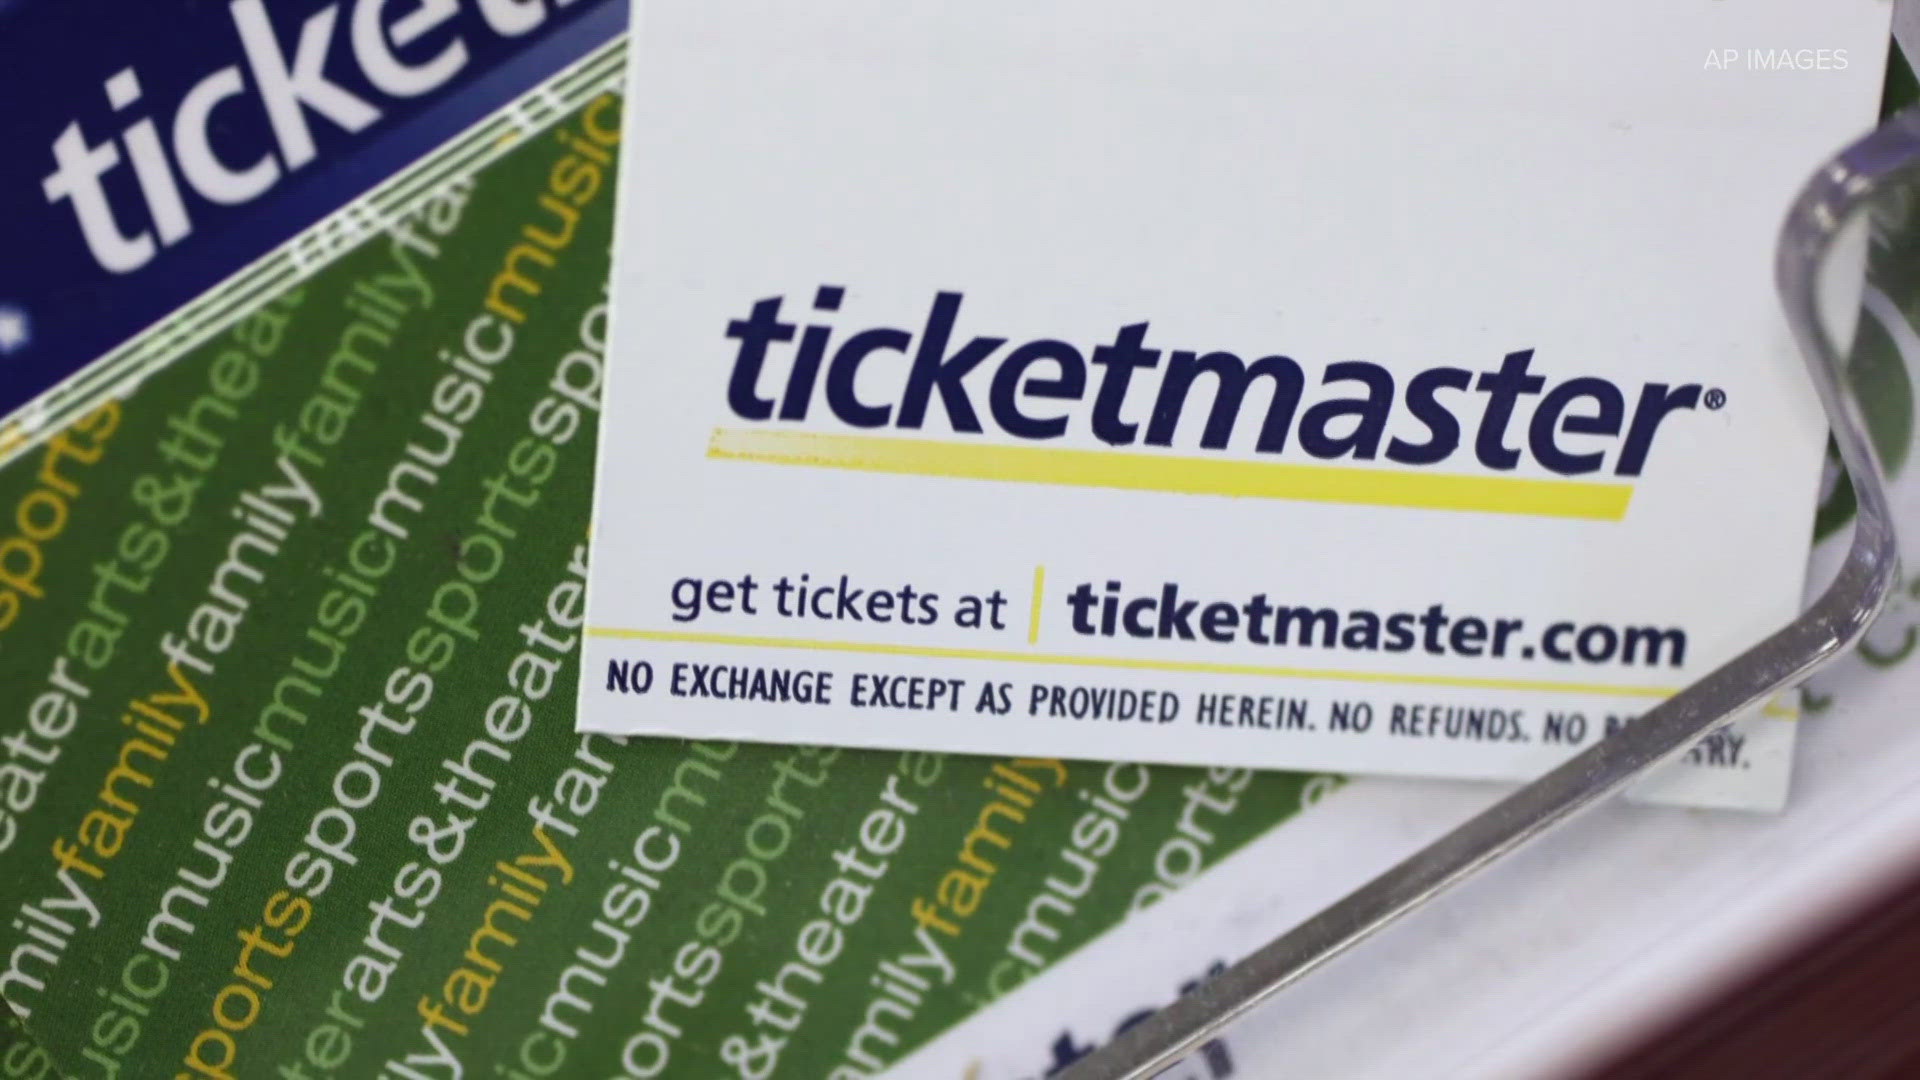 Attorney General Bob Ferguson said Washington state is partnering with the U.S. Department of Justice in an antitrust lawsuit against Ticketmaster.